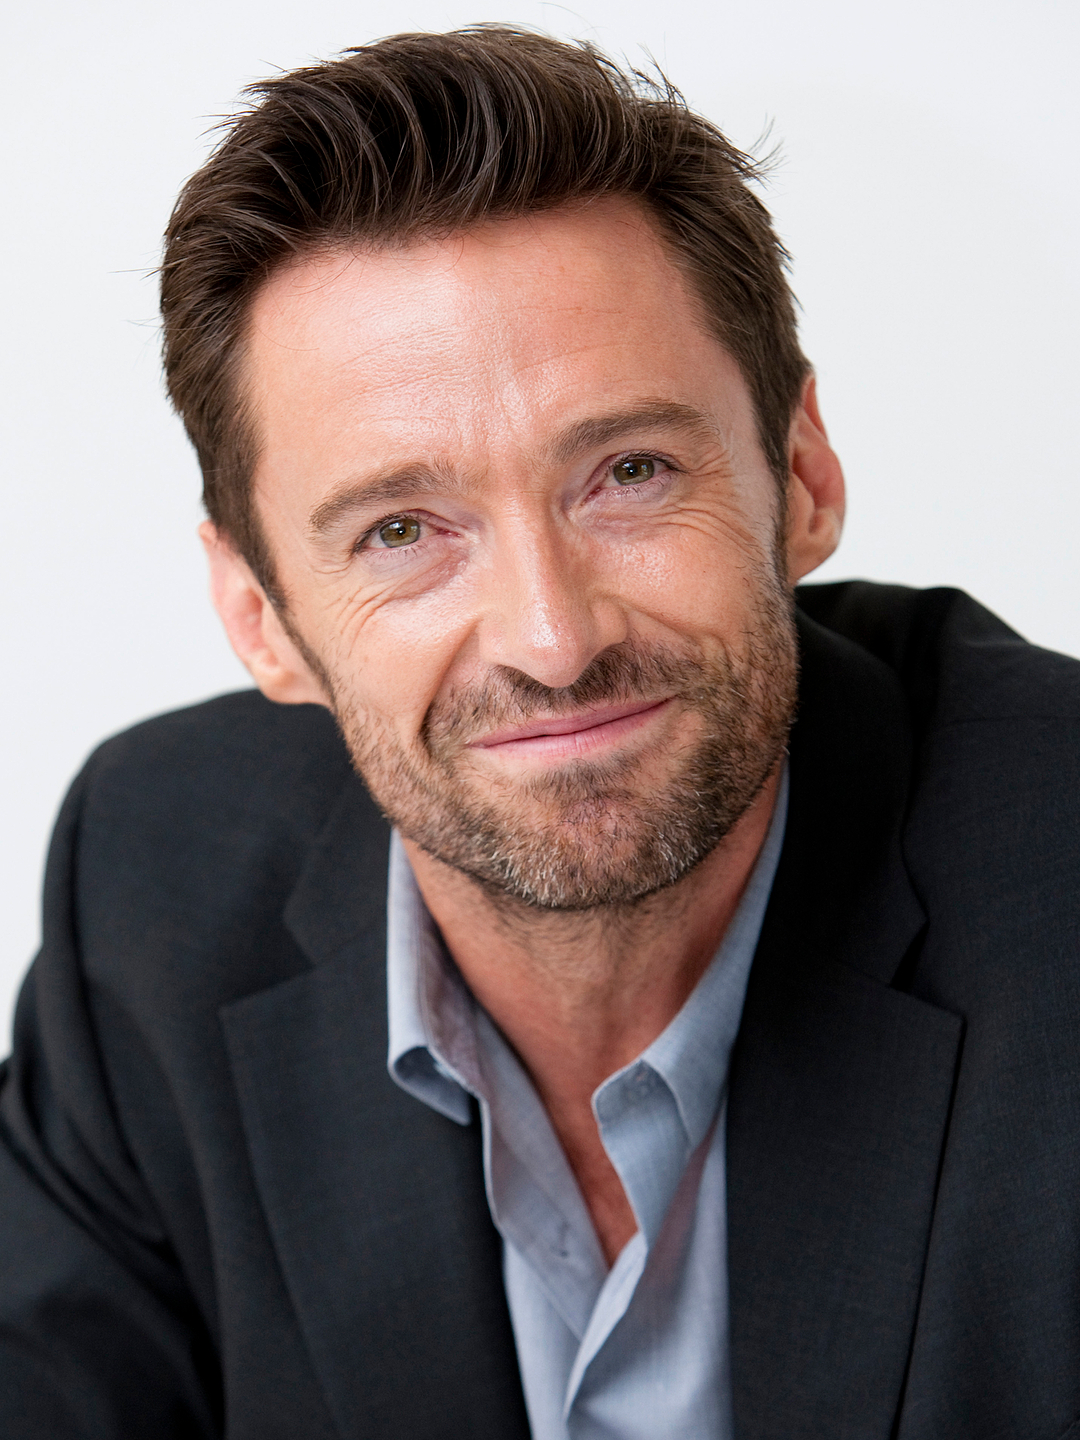 Hugh Jackman who is his mother